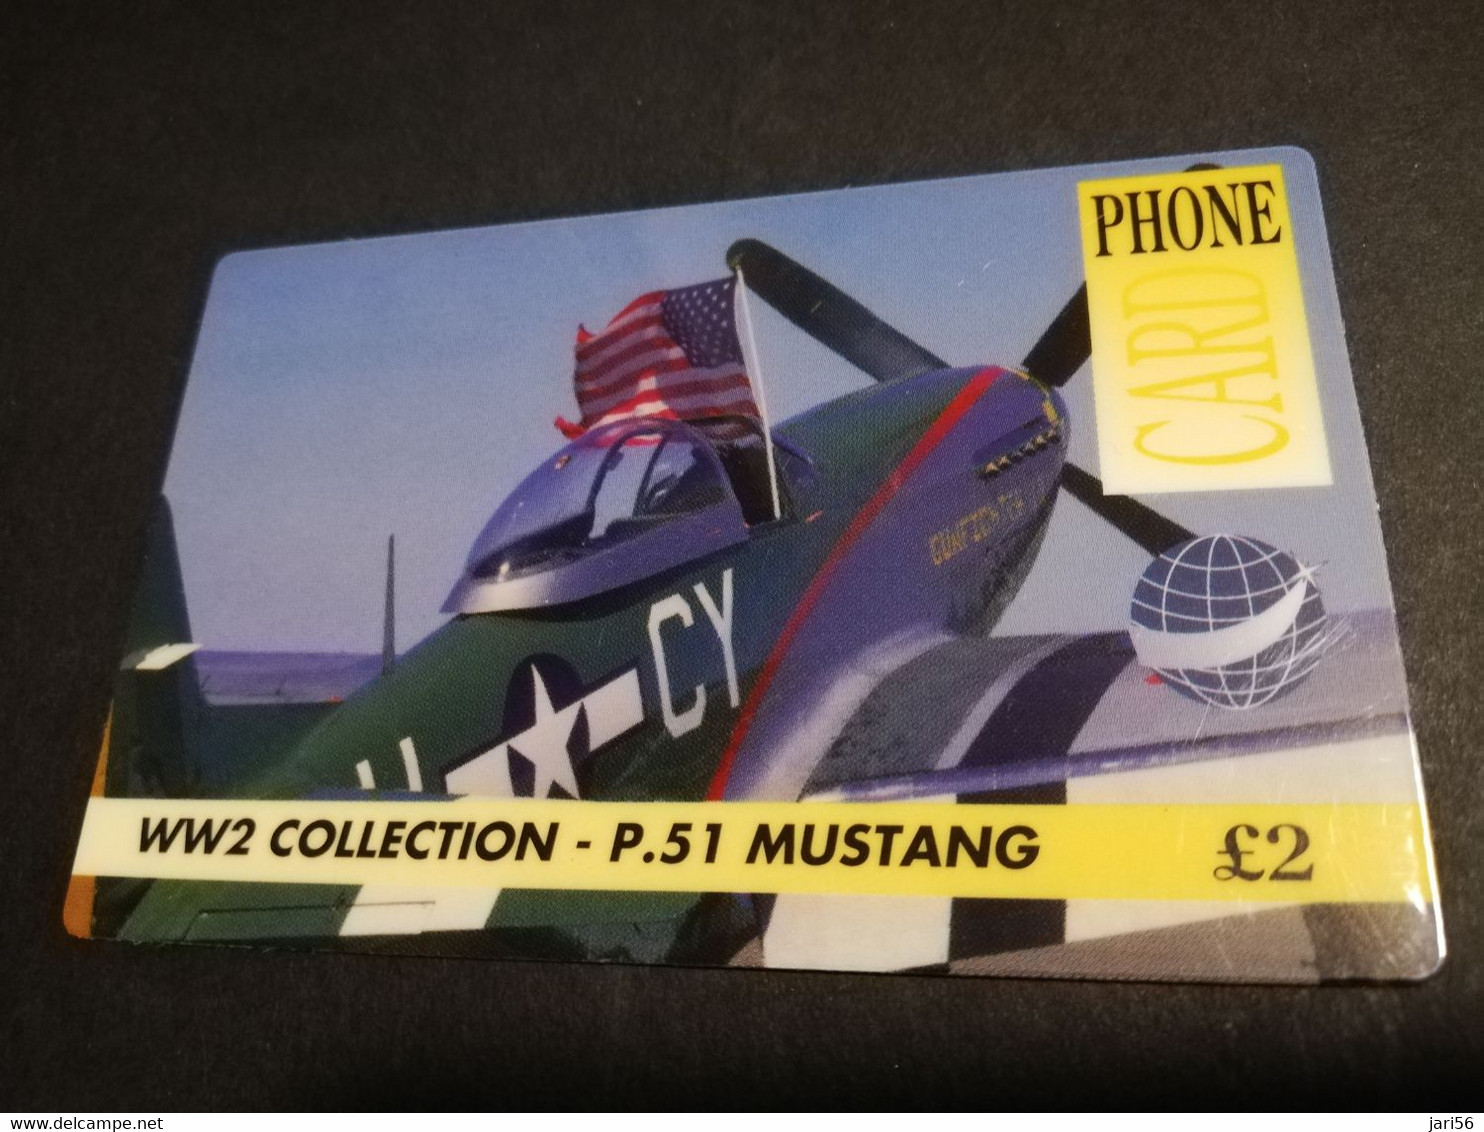 GREAT BRITAIN   3 POUND  AIR PLANES  P-51 MUSTANG   DIT PHONECARD    PREPAID CARD      **5918** - [10] Collections